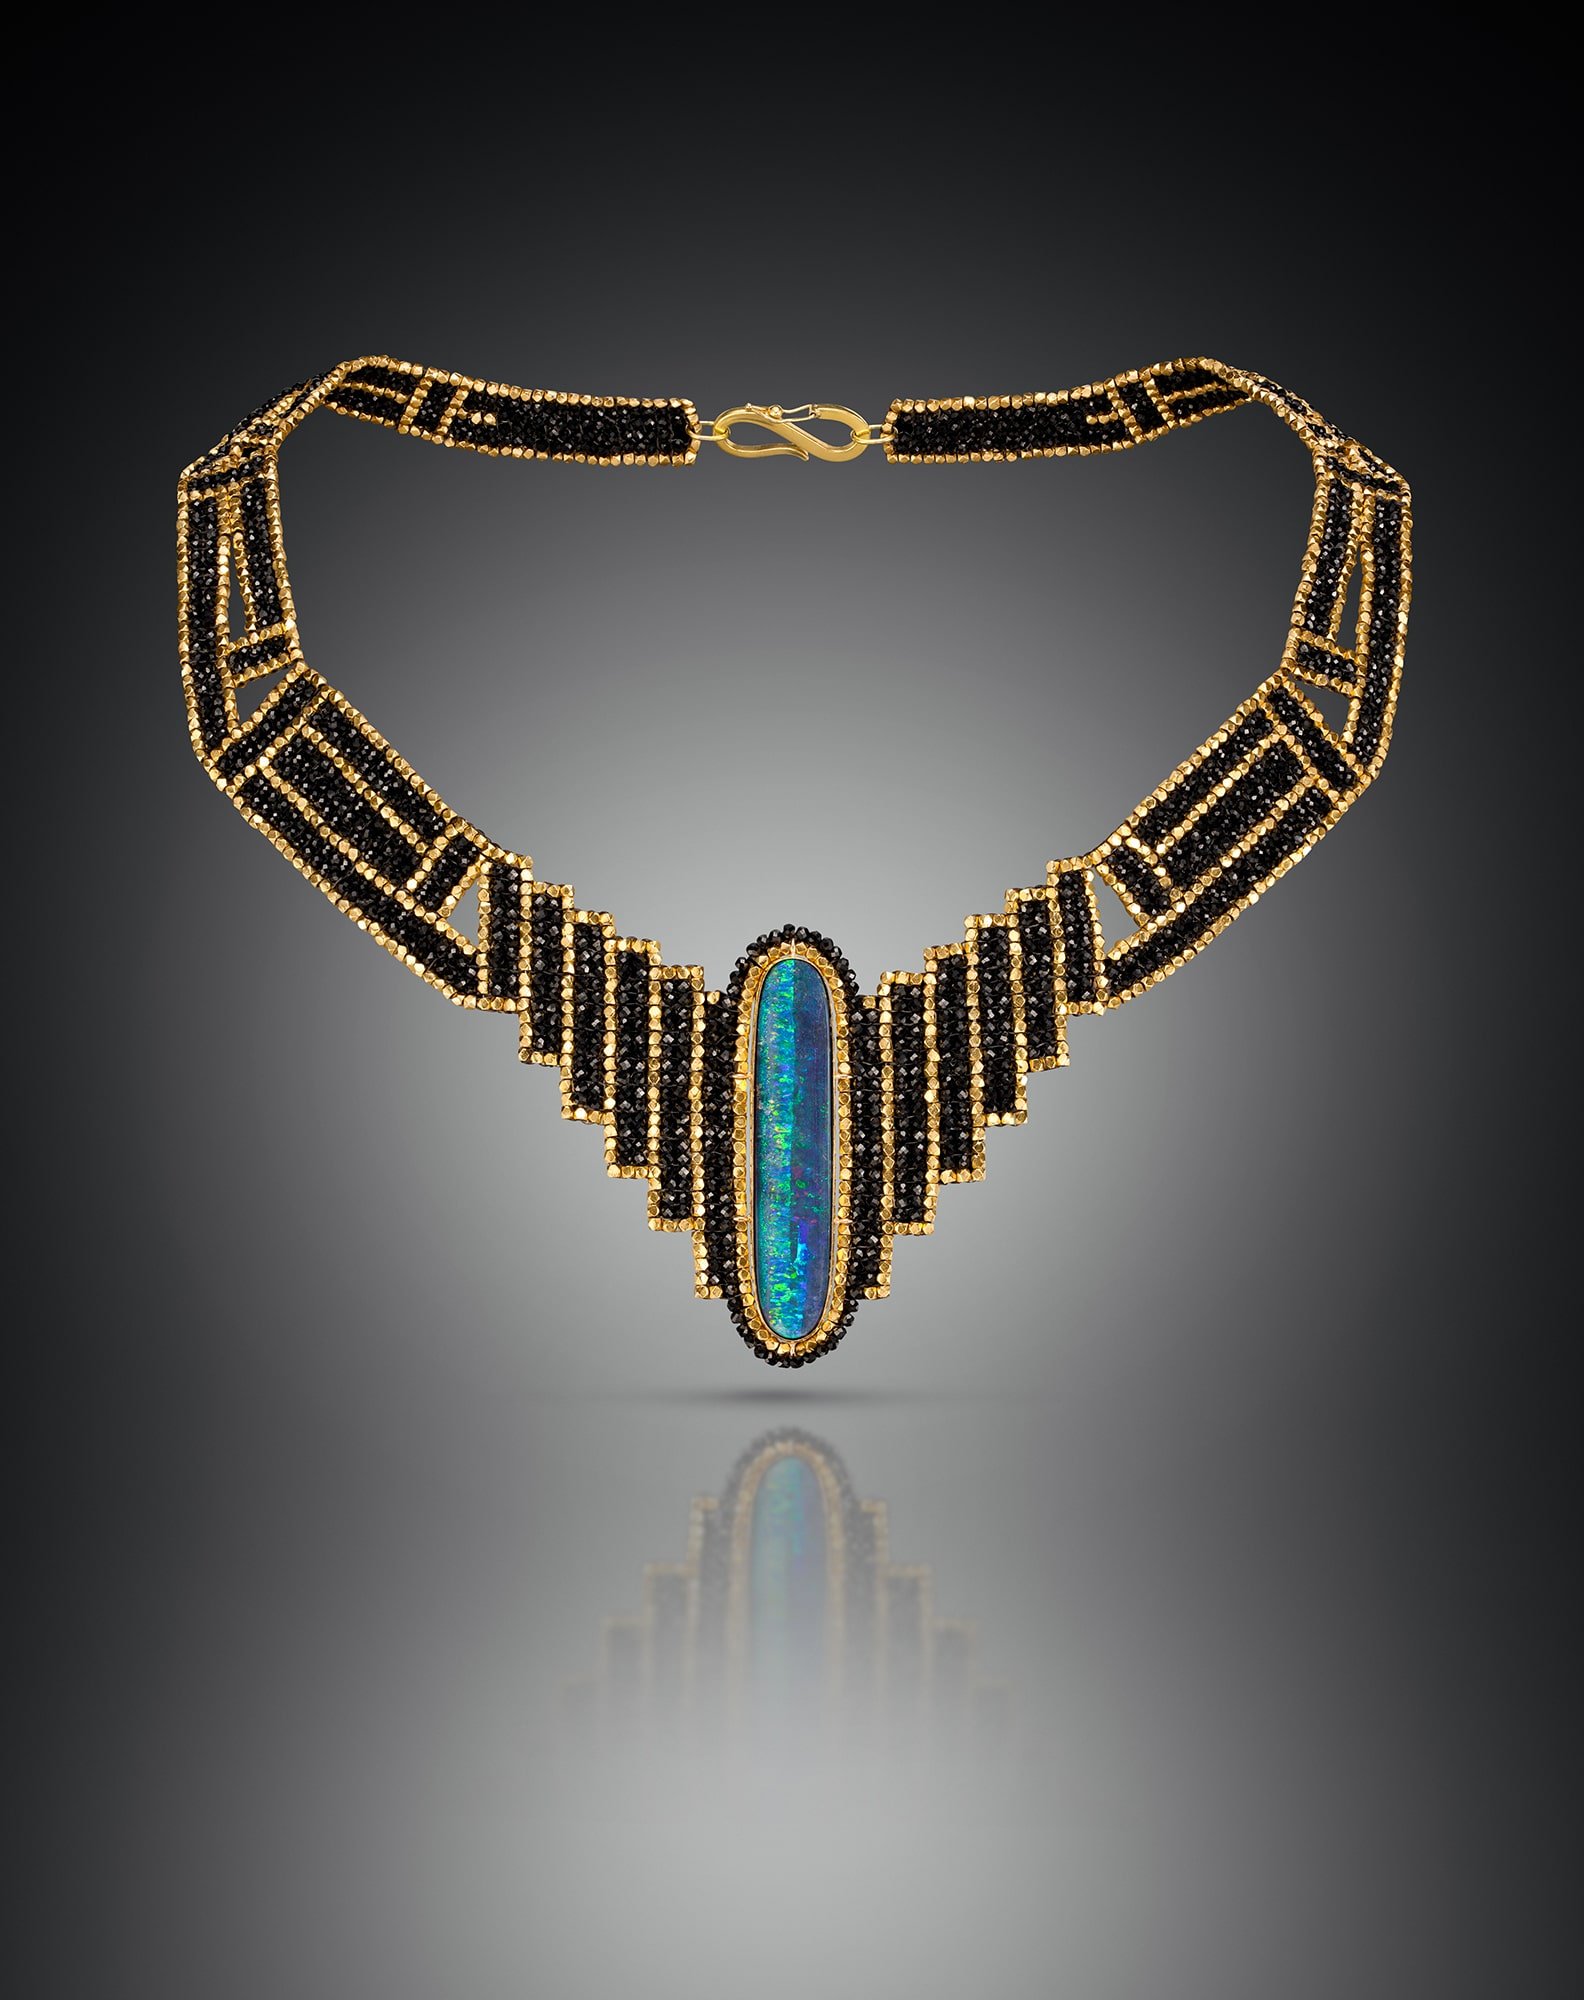 Drama Collar.  Woven of black spinel, and 18k gold beads, this collar has large center opal set in a hand fabricated bezel of 18k gold.